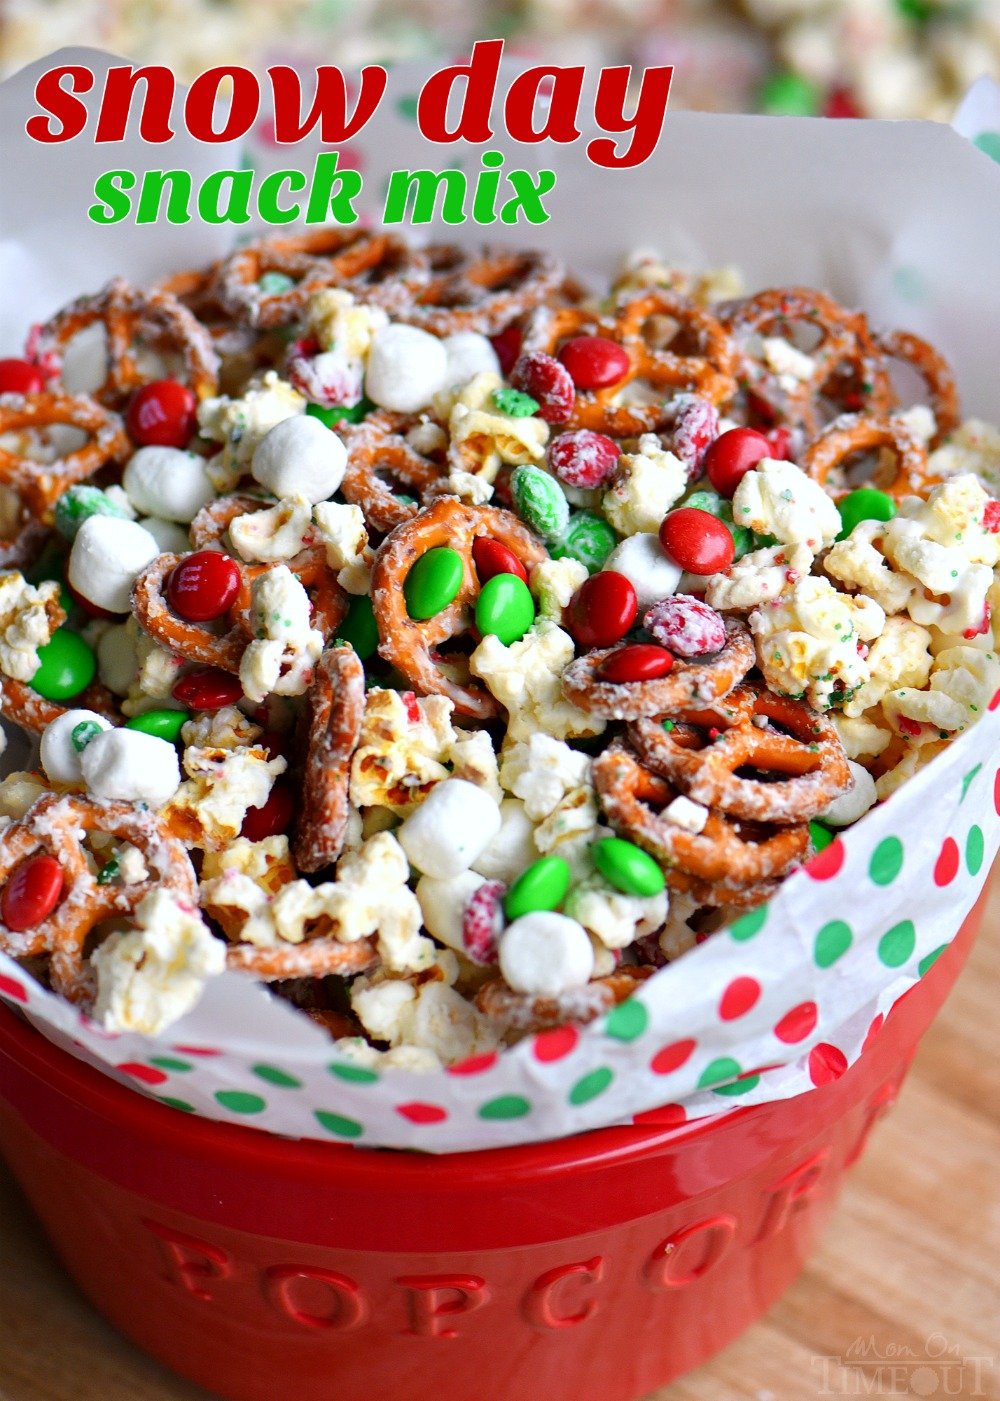 This wonderfully festive Snow Day Snack Mix is the perfect easy treat all winter long! Both sweet and salty, this holiday snack mix is great for Christmas, movie nights, parties, gifts and so much more! // Mom On Timeout #christmas #dessert #snack #pretzels #marshmallows #redandgreen #momontimeout